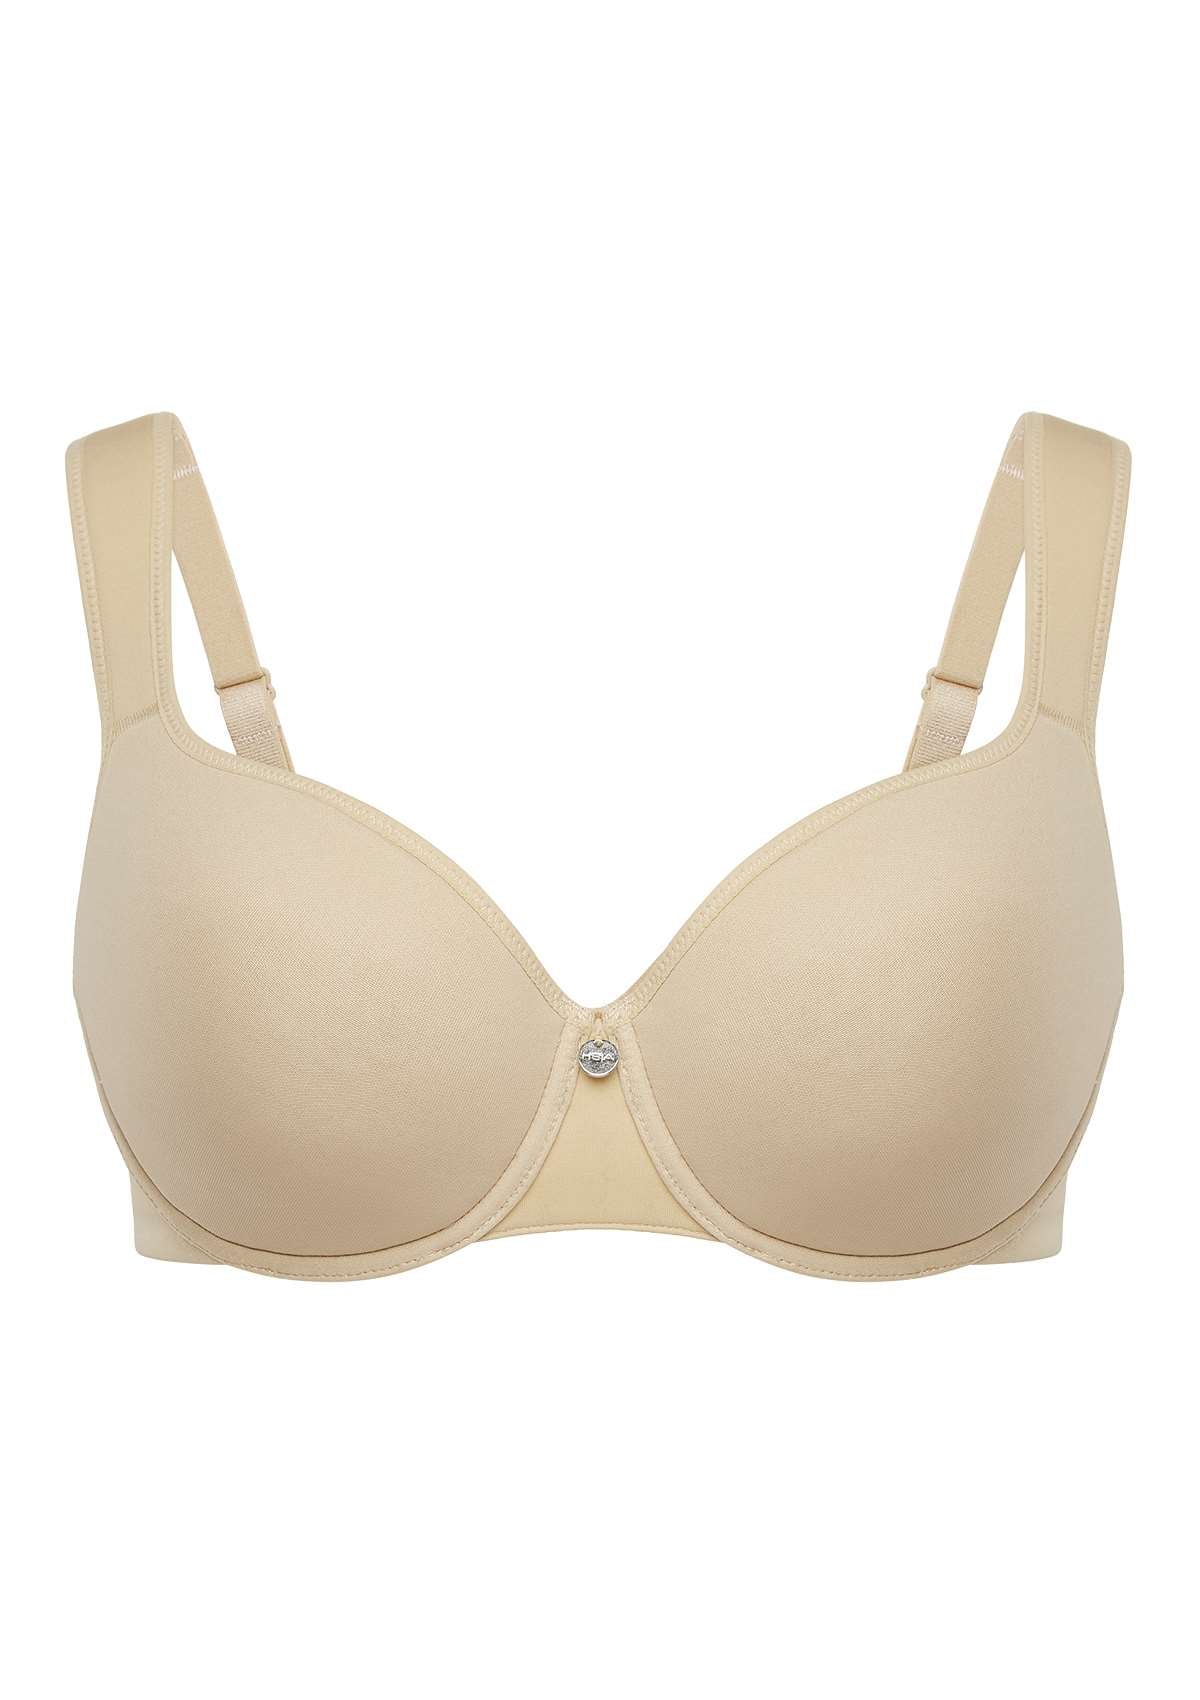 HSIA Patricia Seamless Lightly Padded Minimizer Bra -for Bigger Busts - Beige / 46 / D